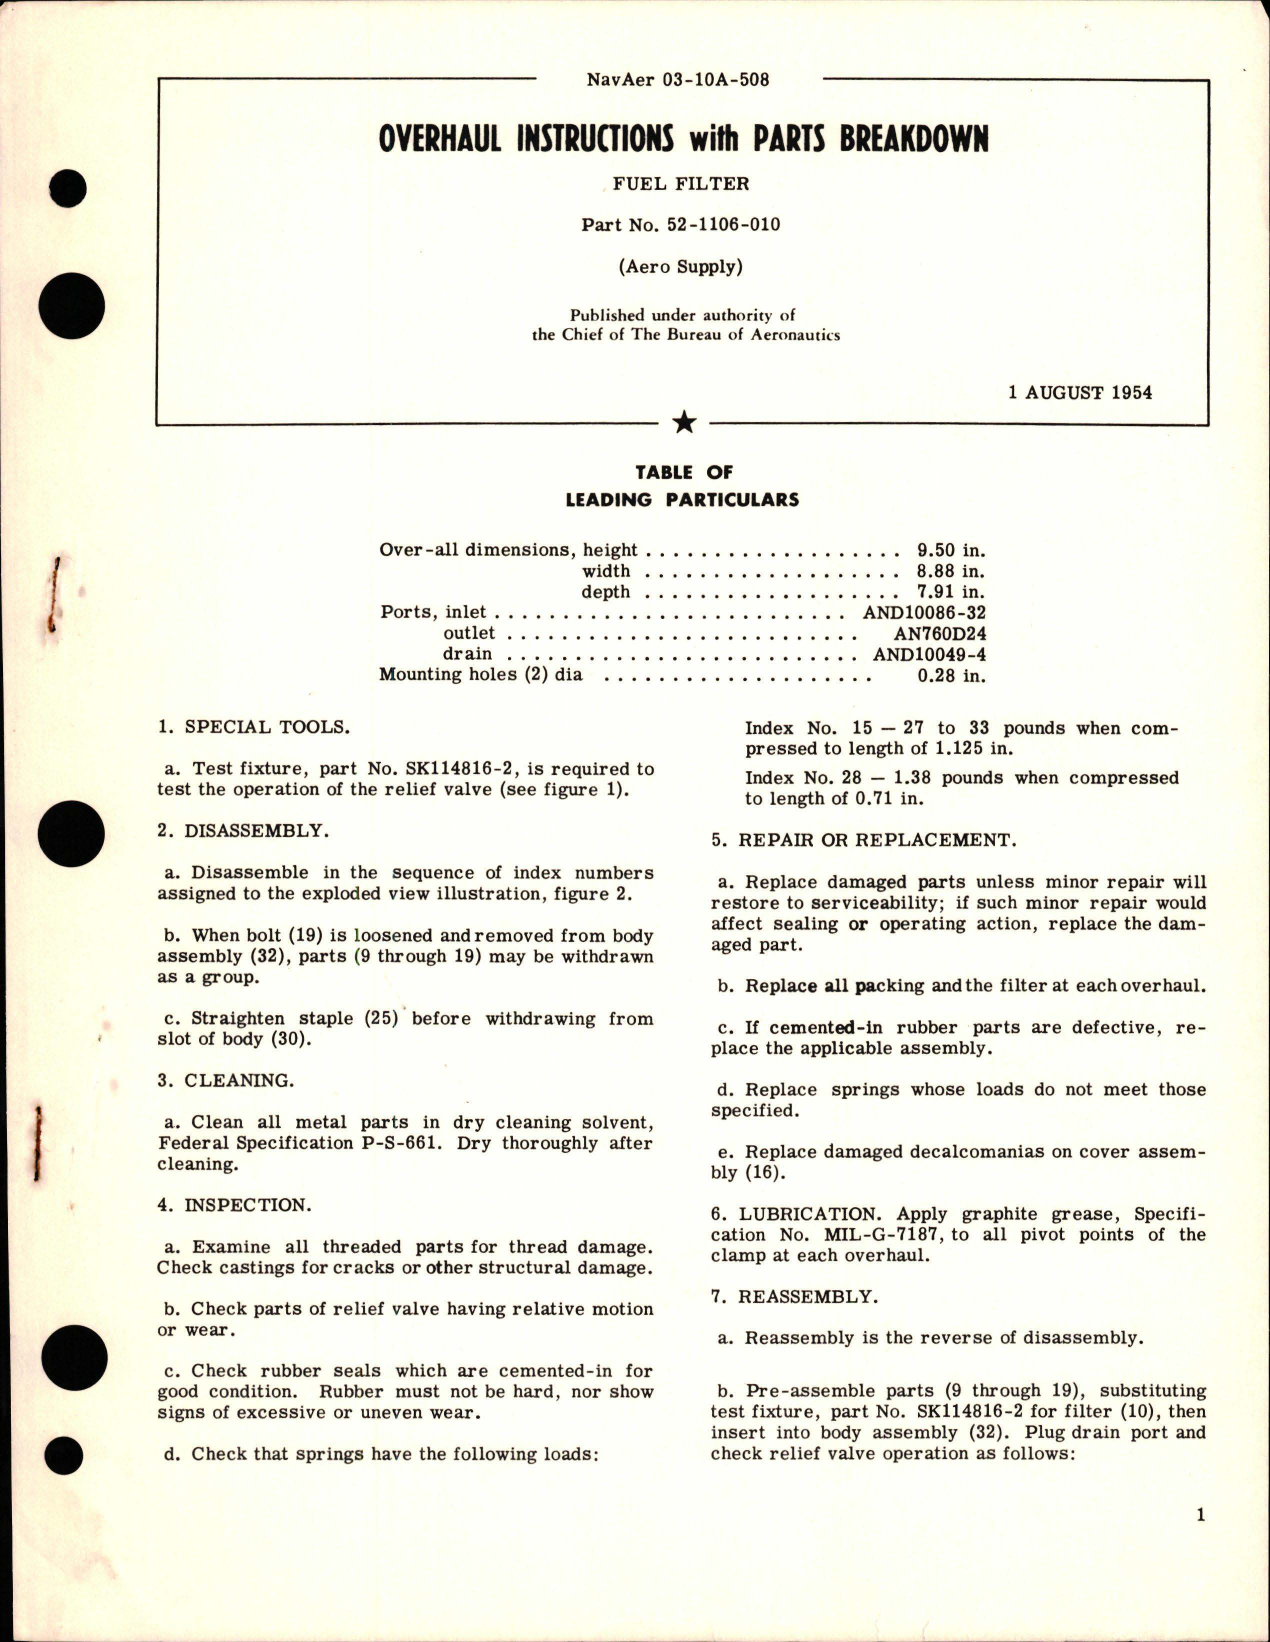 Sample page 1 from AirCorps Library document: Overhaul Instructions with Parts Breakdown for Fuel Filter - Part 52-1106-010